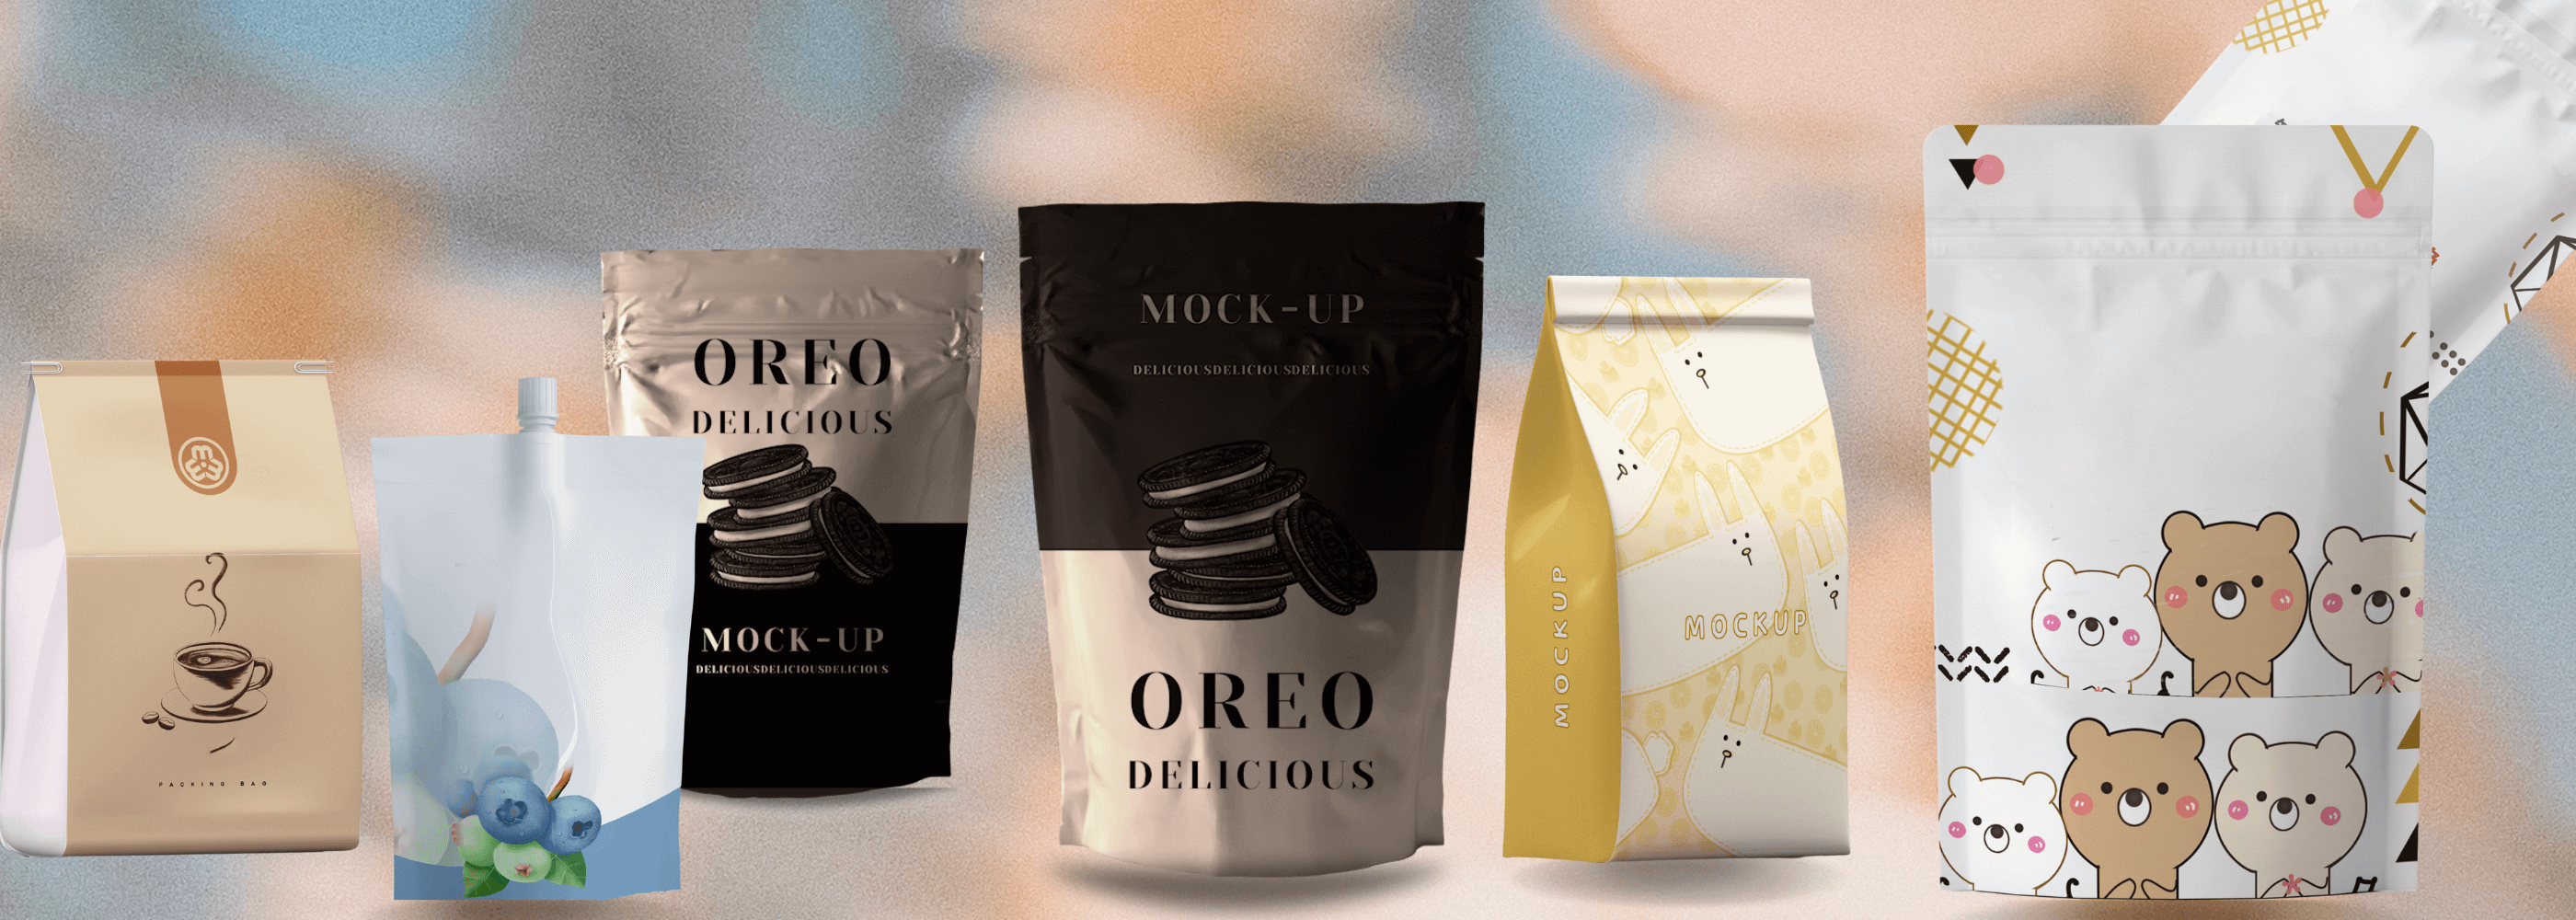 Anacotte Packaging Mockup Options 2800 x 1000